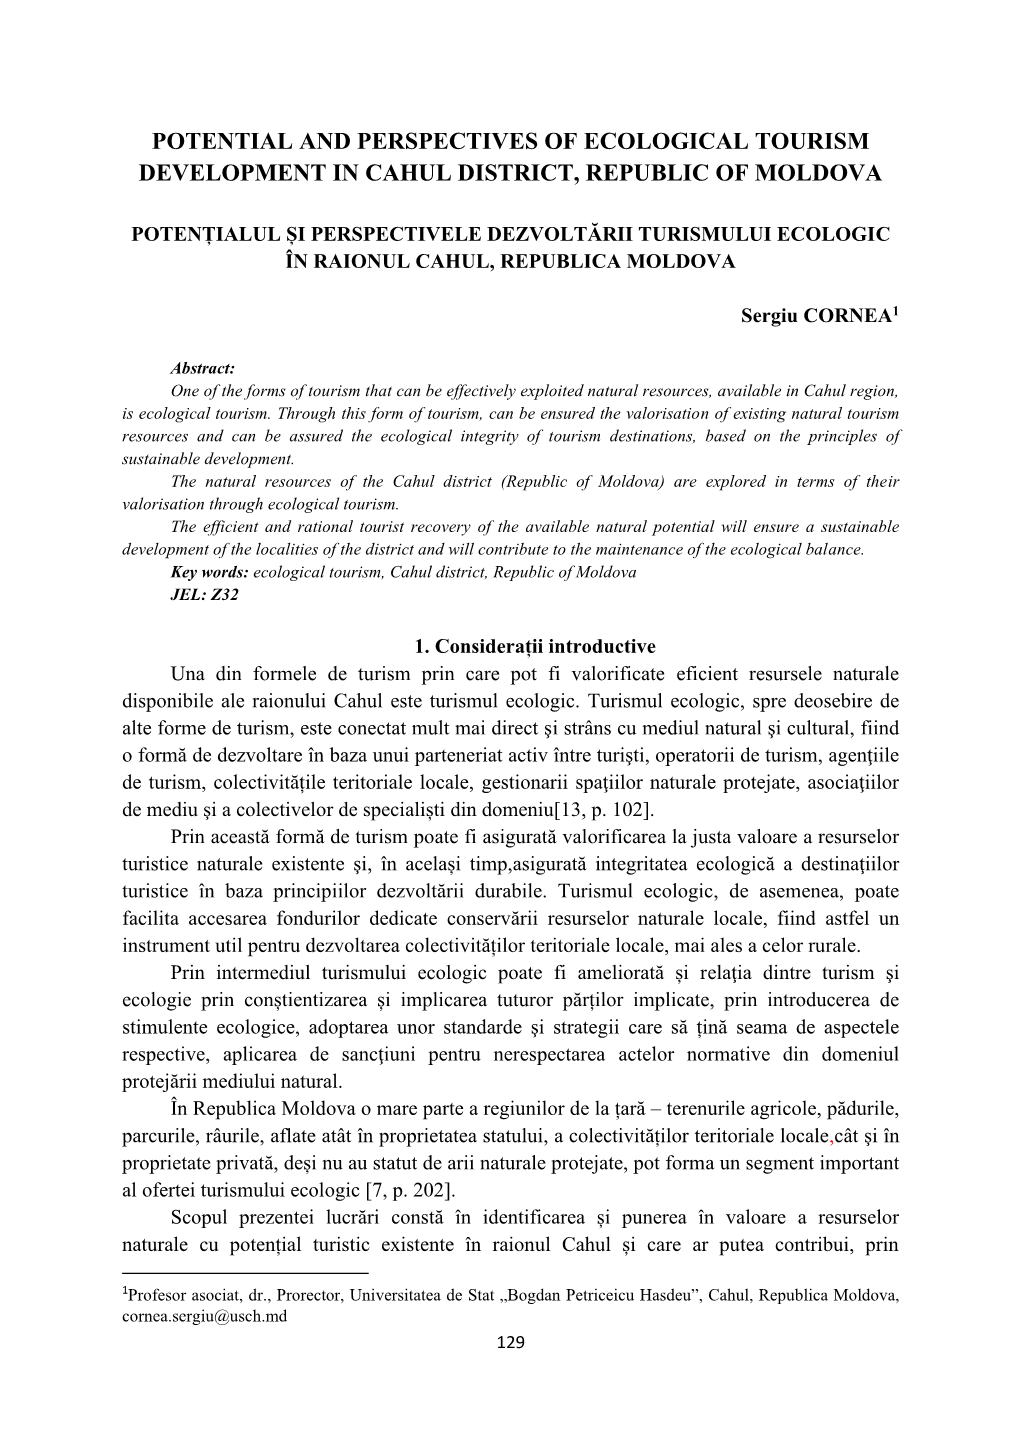 Potential and Perspectives of Ecological Tourism Development in Cahul District, Republic of Moldova